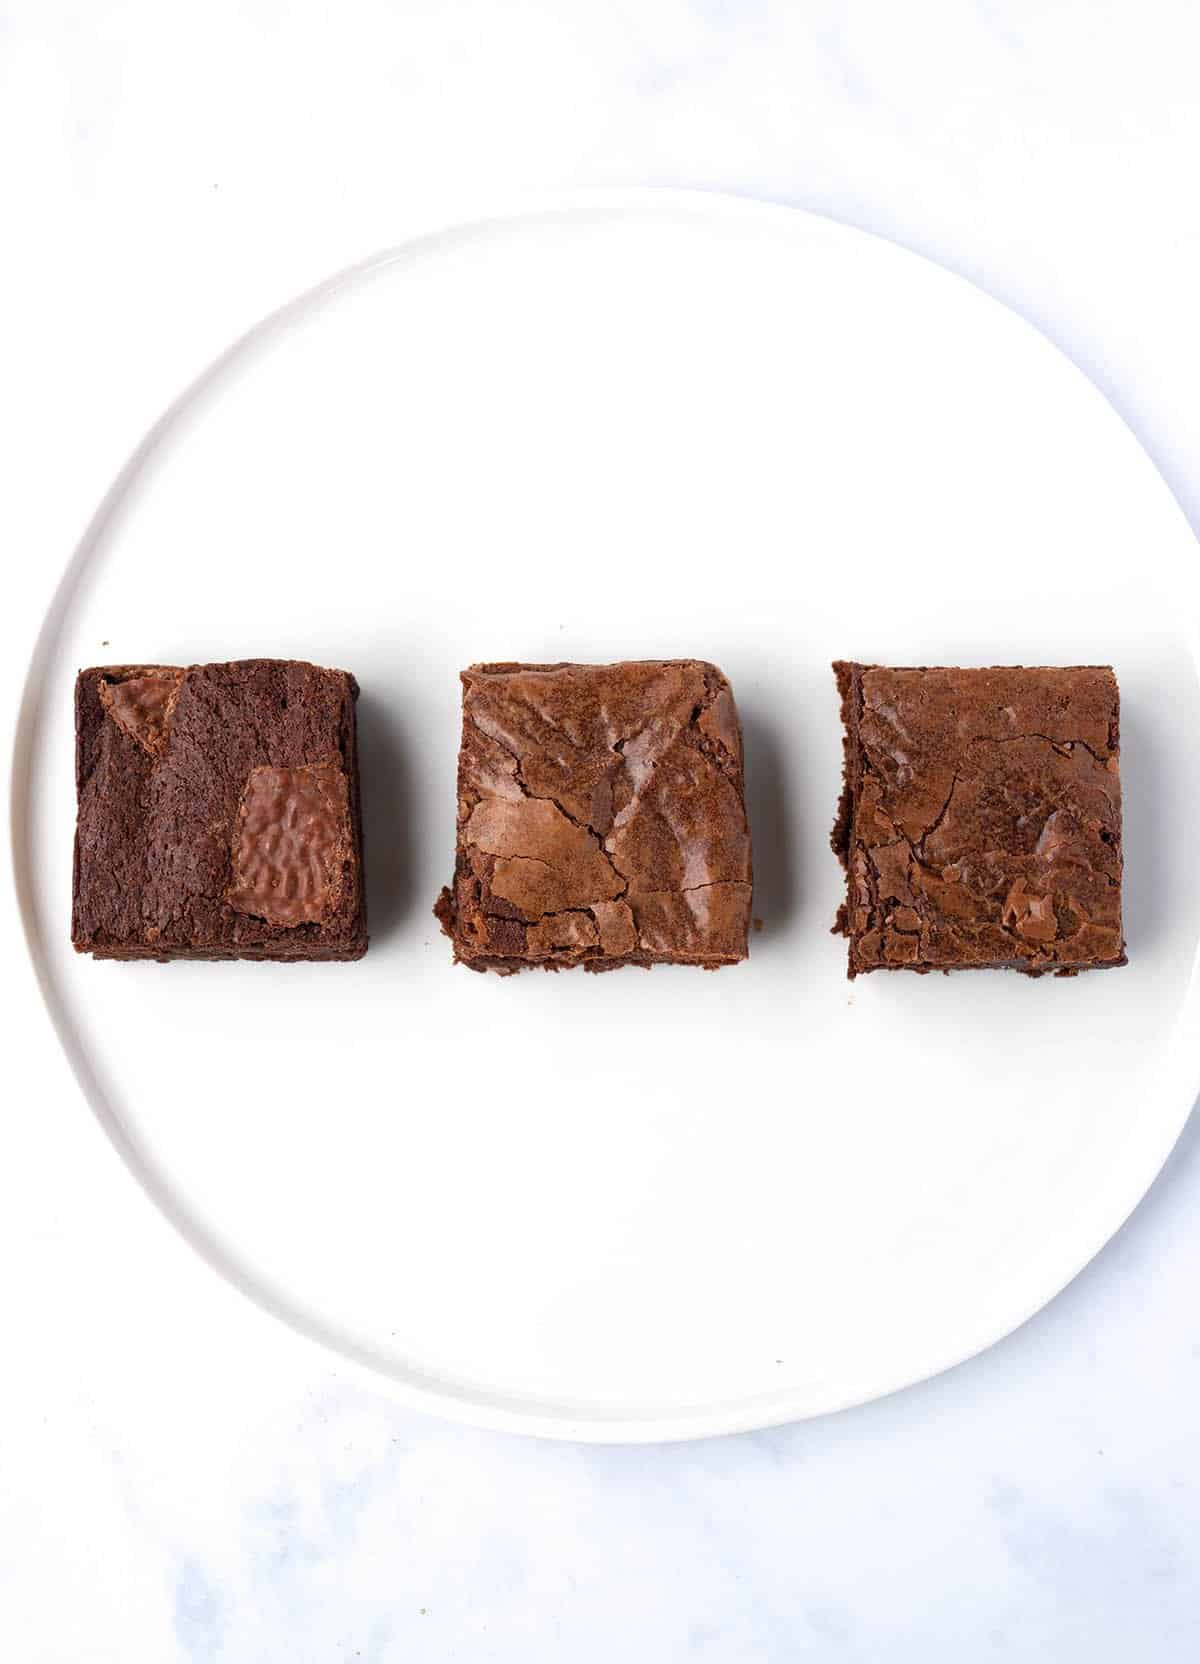 Top view of three different variations of Chocolate Orange Brownies.